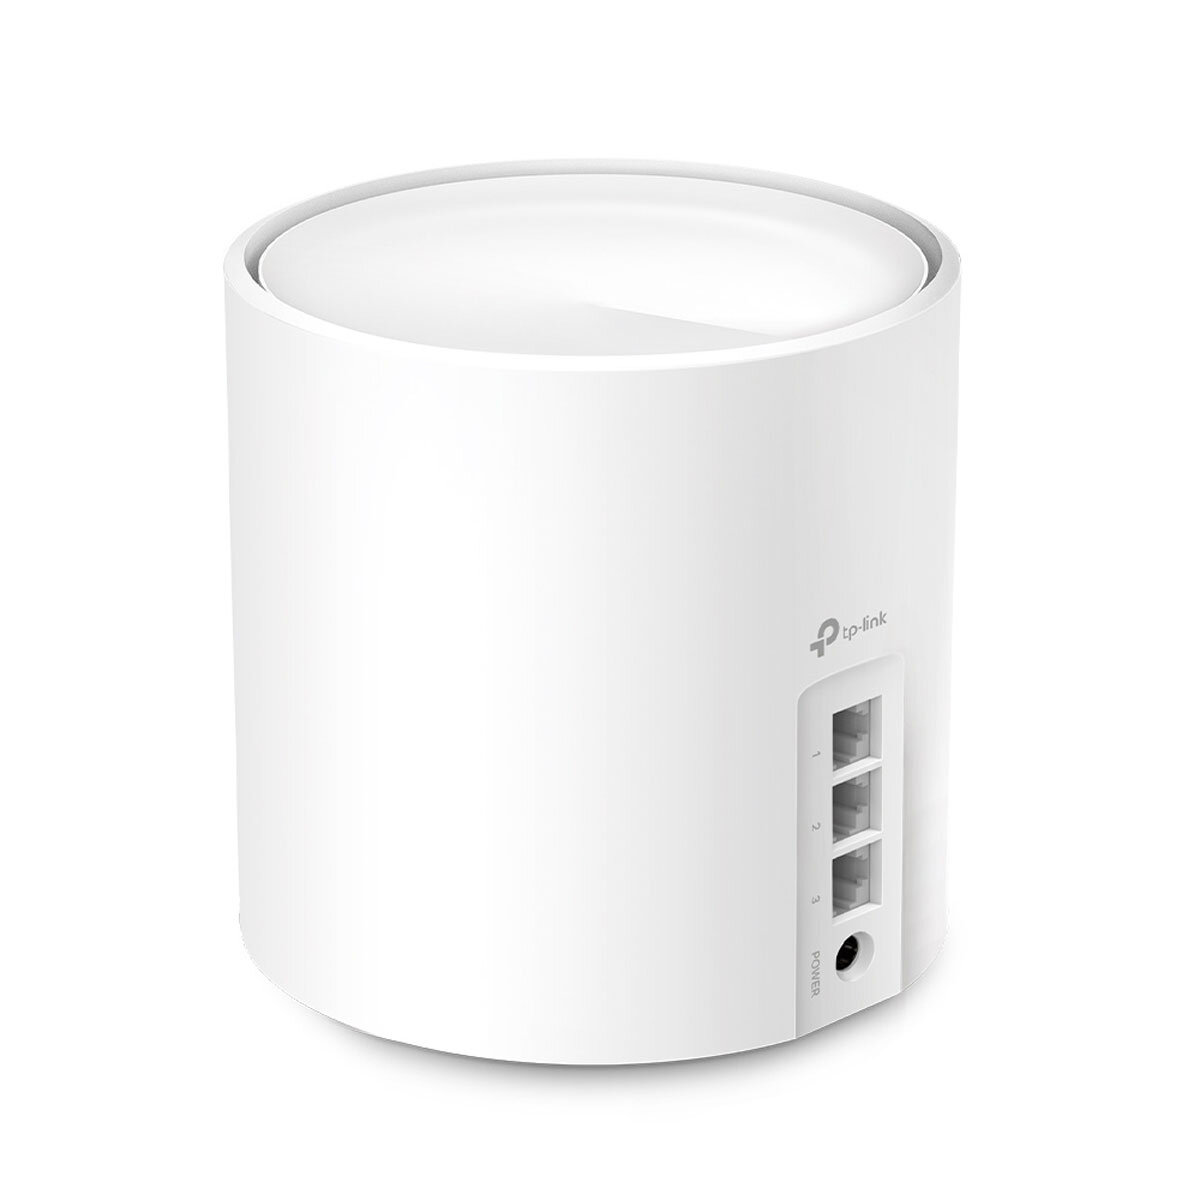 TP-LINK DECO X50 (4-PACK) WIFI 6 DUAL-BAND AX3000 WHOLE HOME MESH SYSTEM WITH AI DRIVEN MESH at costco.co.uk